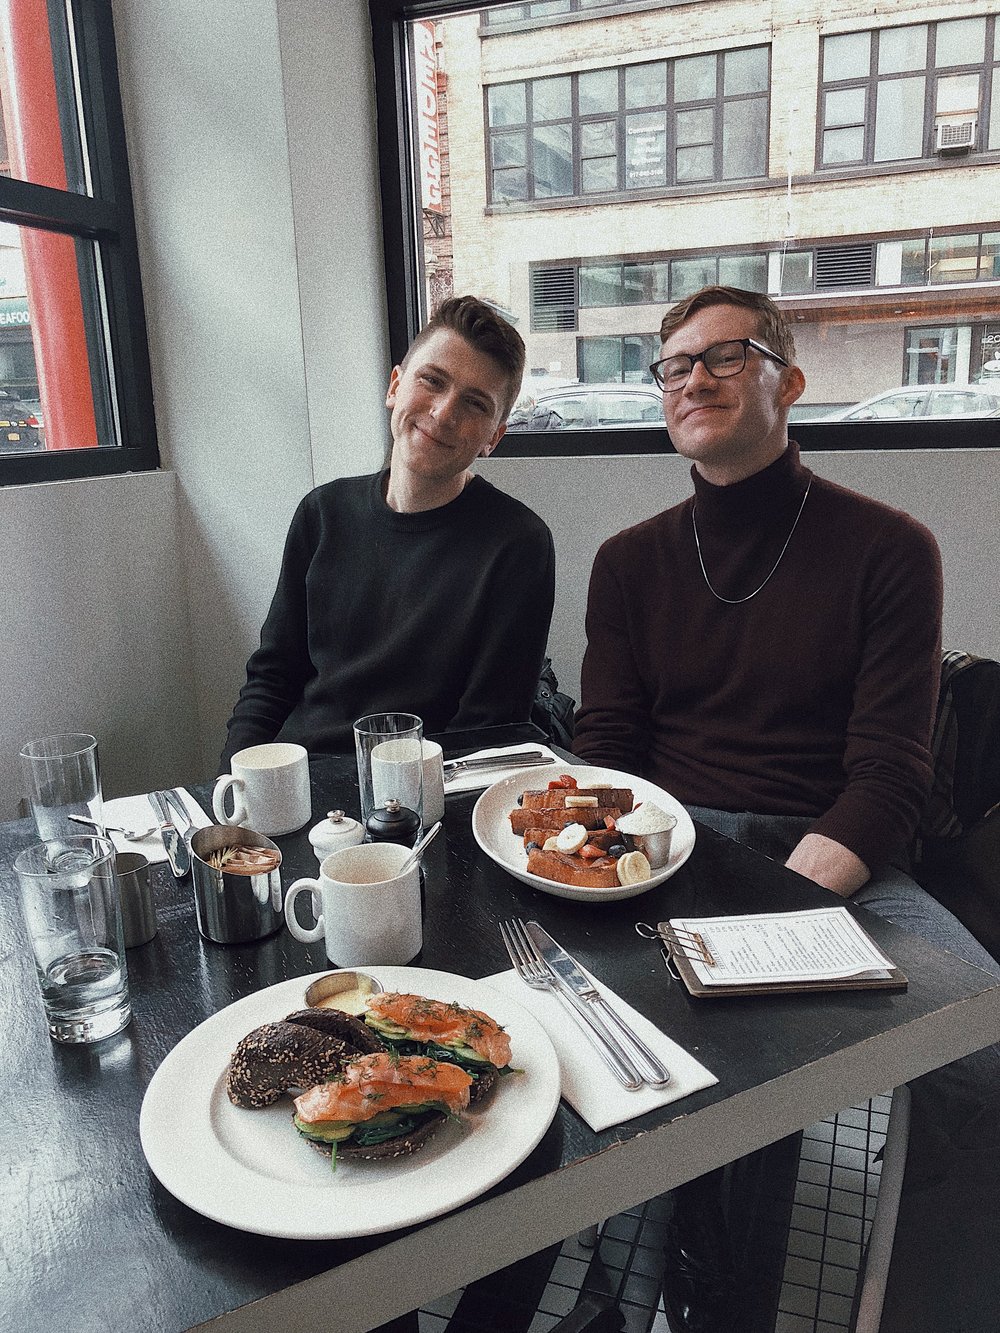  Next we have the two coolest people ever!!! Trevor (left @clevertrevor_) and Austin (right @austindwhittle) met up with me for a quick breakfast and a walk around Soho before we all went about our busy day!  Ps. Salmon bagel pictured here was AMAZIN